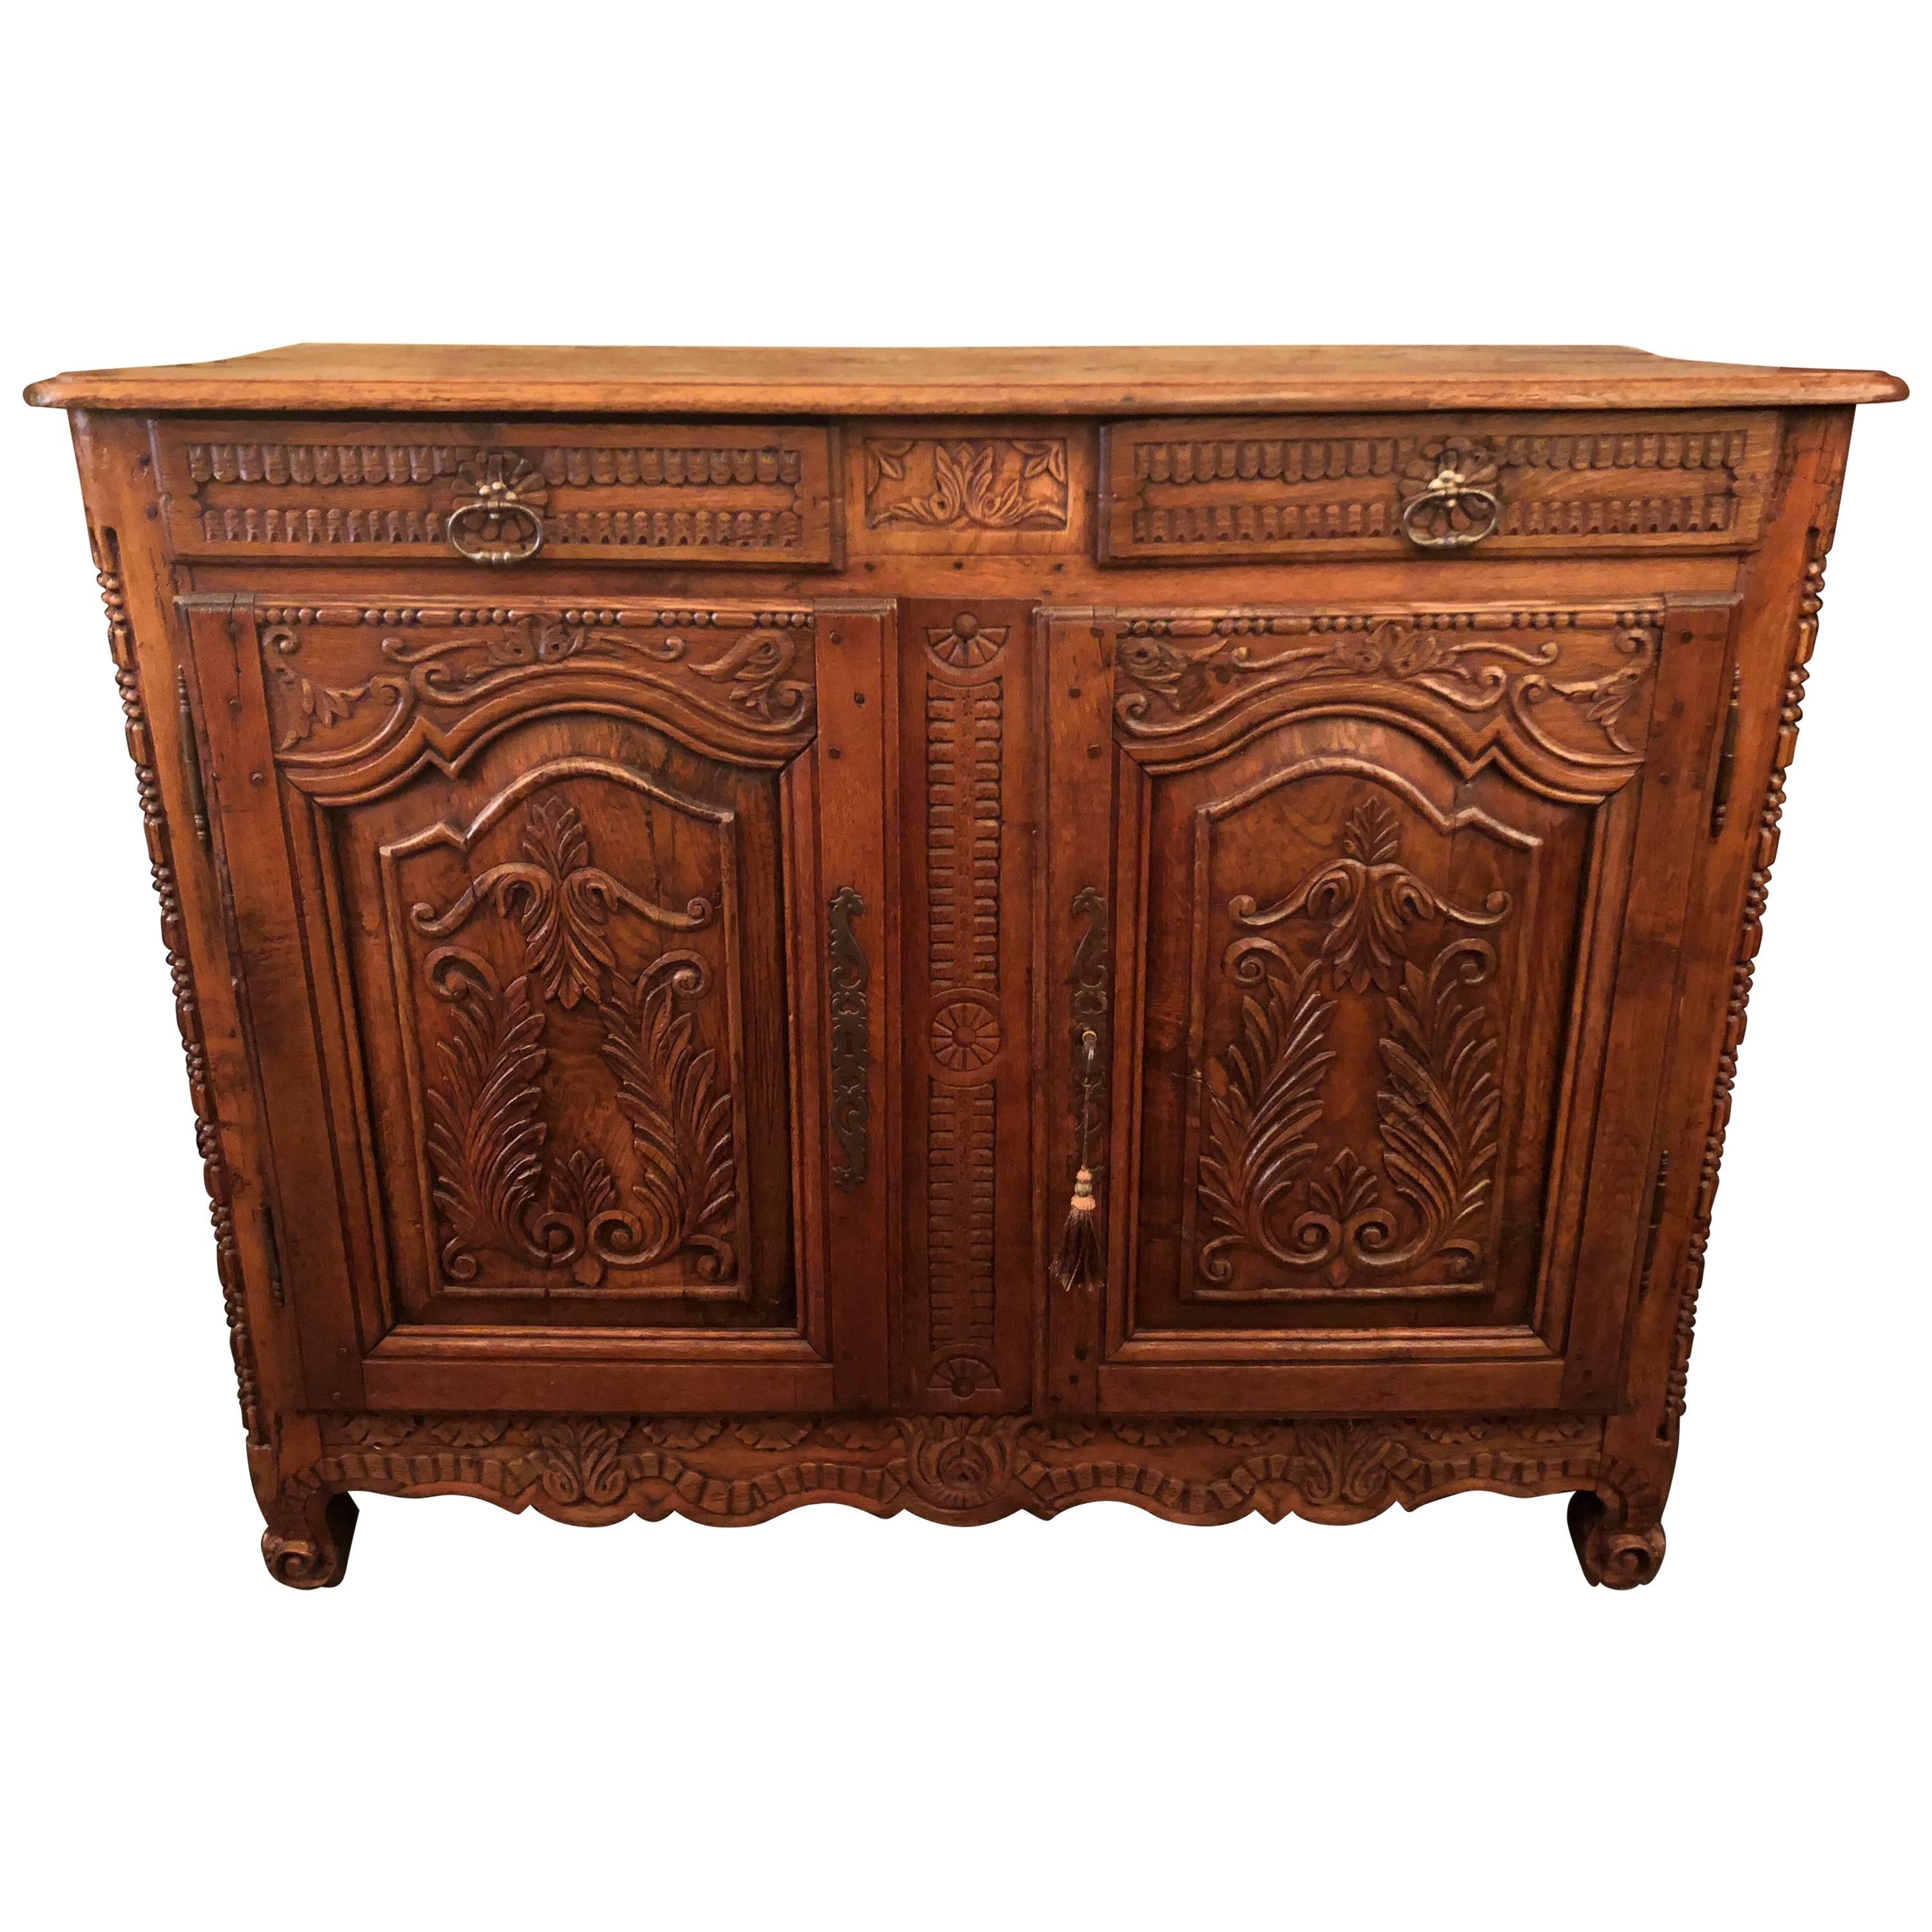 Antique French Carved Walnut "Brittany" Designed Buffet, circa 1830